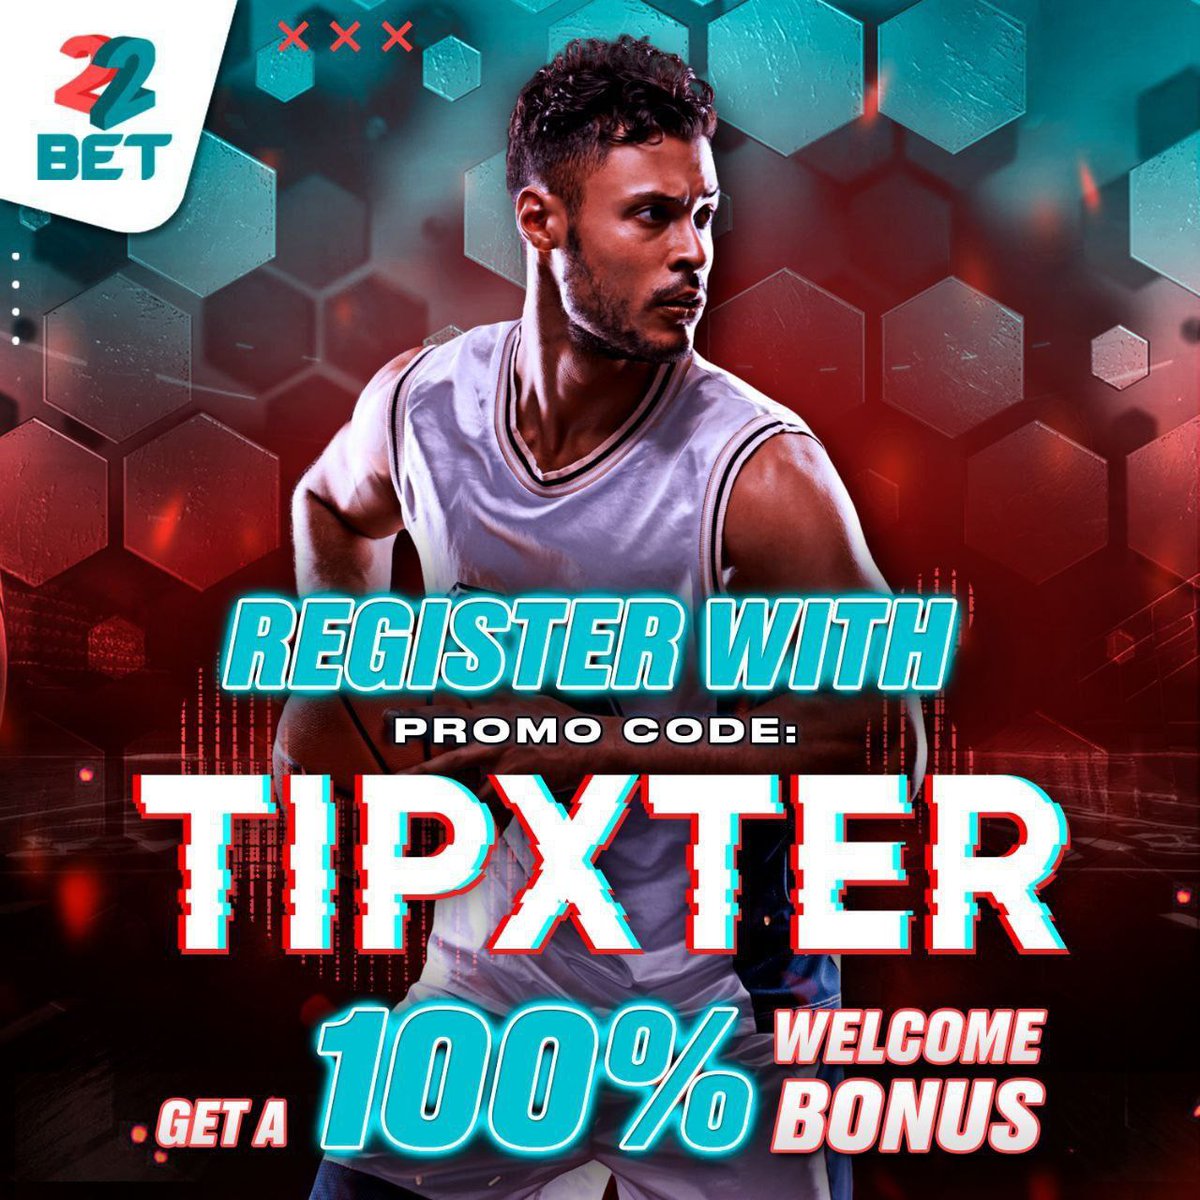 Total Goals Minute On  22bet     74 Odds Code : J8RAX Not On 22bet Register below   🇳🇬 ad.22betpartners.com/redirect.aspx?…  🇬🇭 here - cutt.ly/6KM30z0 🇰🇪 bit.ly/3LHh8FQ 🇺🇬 bit.ly/3x2FAxI  🌎 bit.ly/3NOUAoz  Bet responsibly